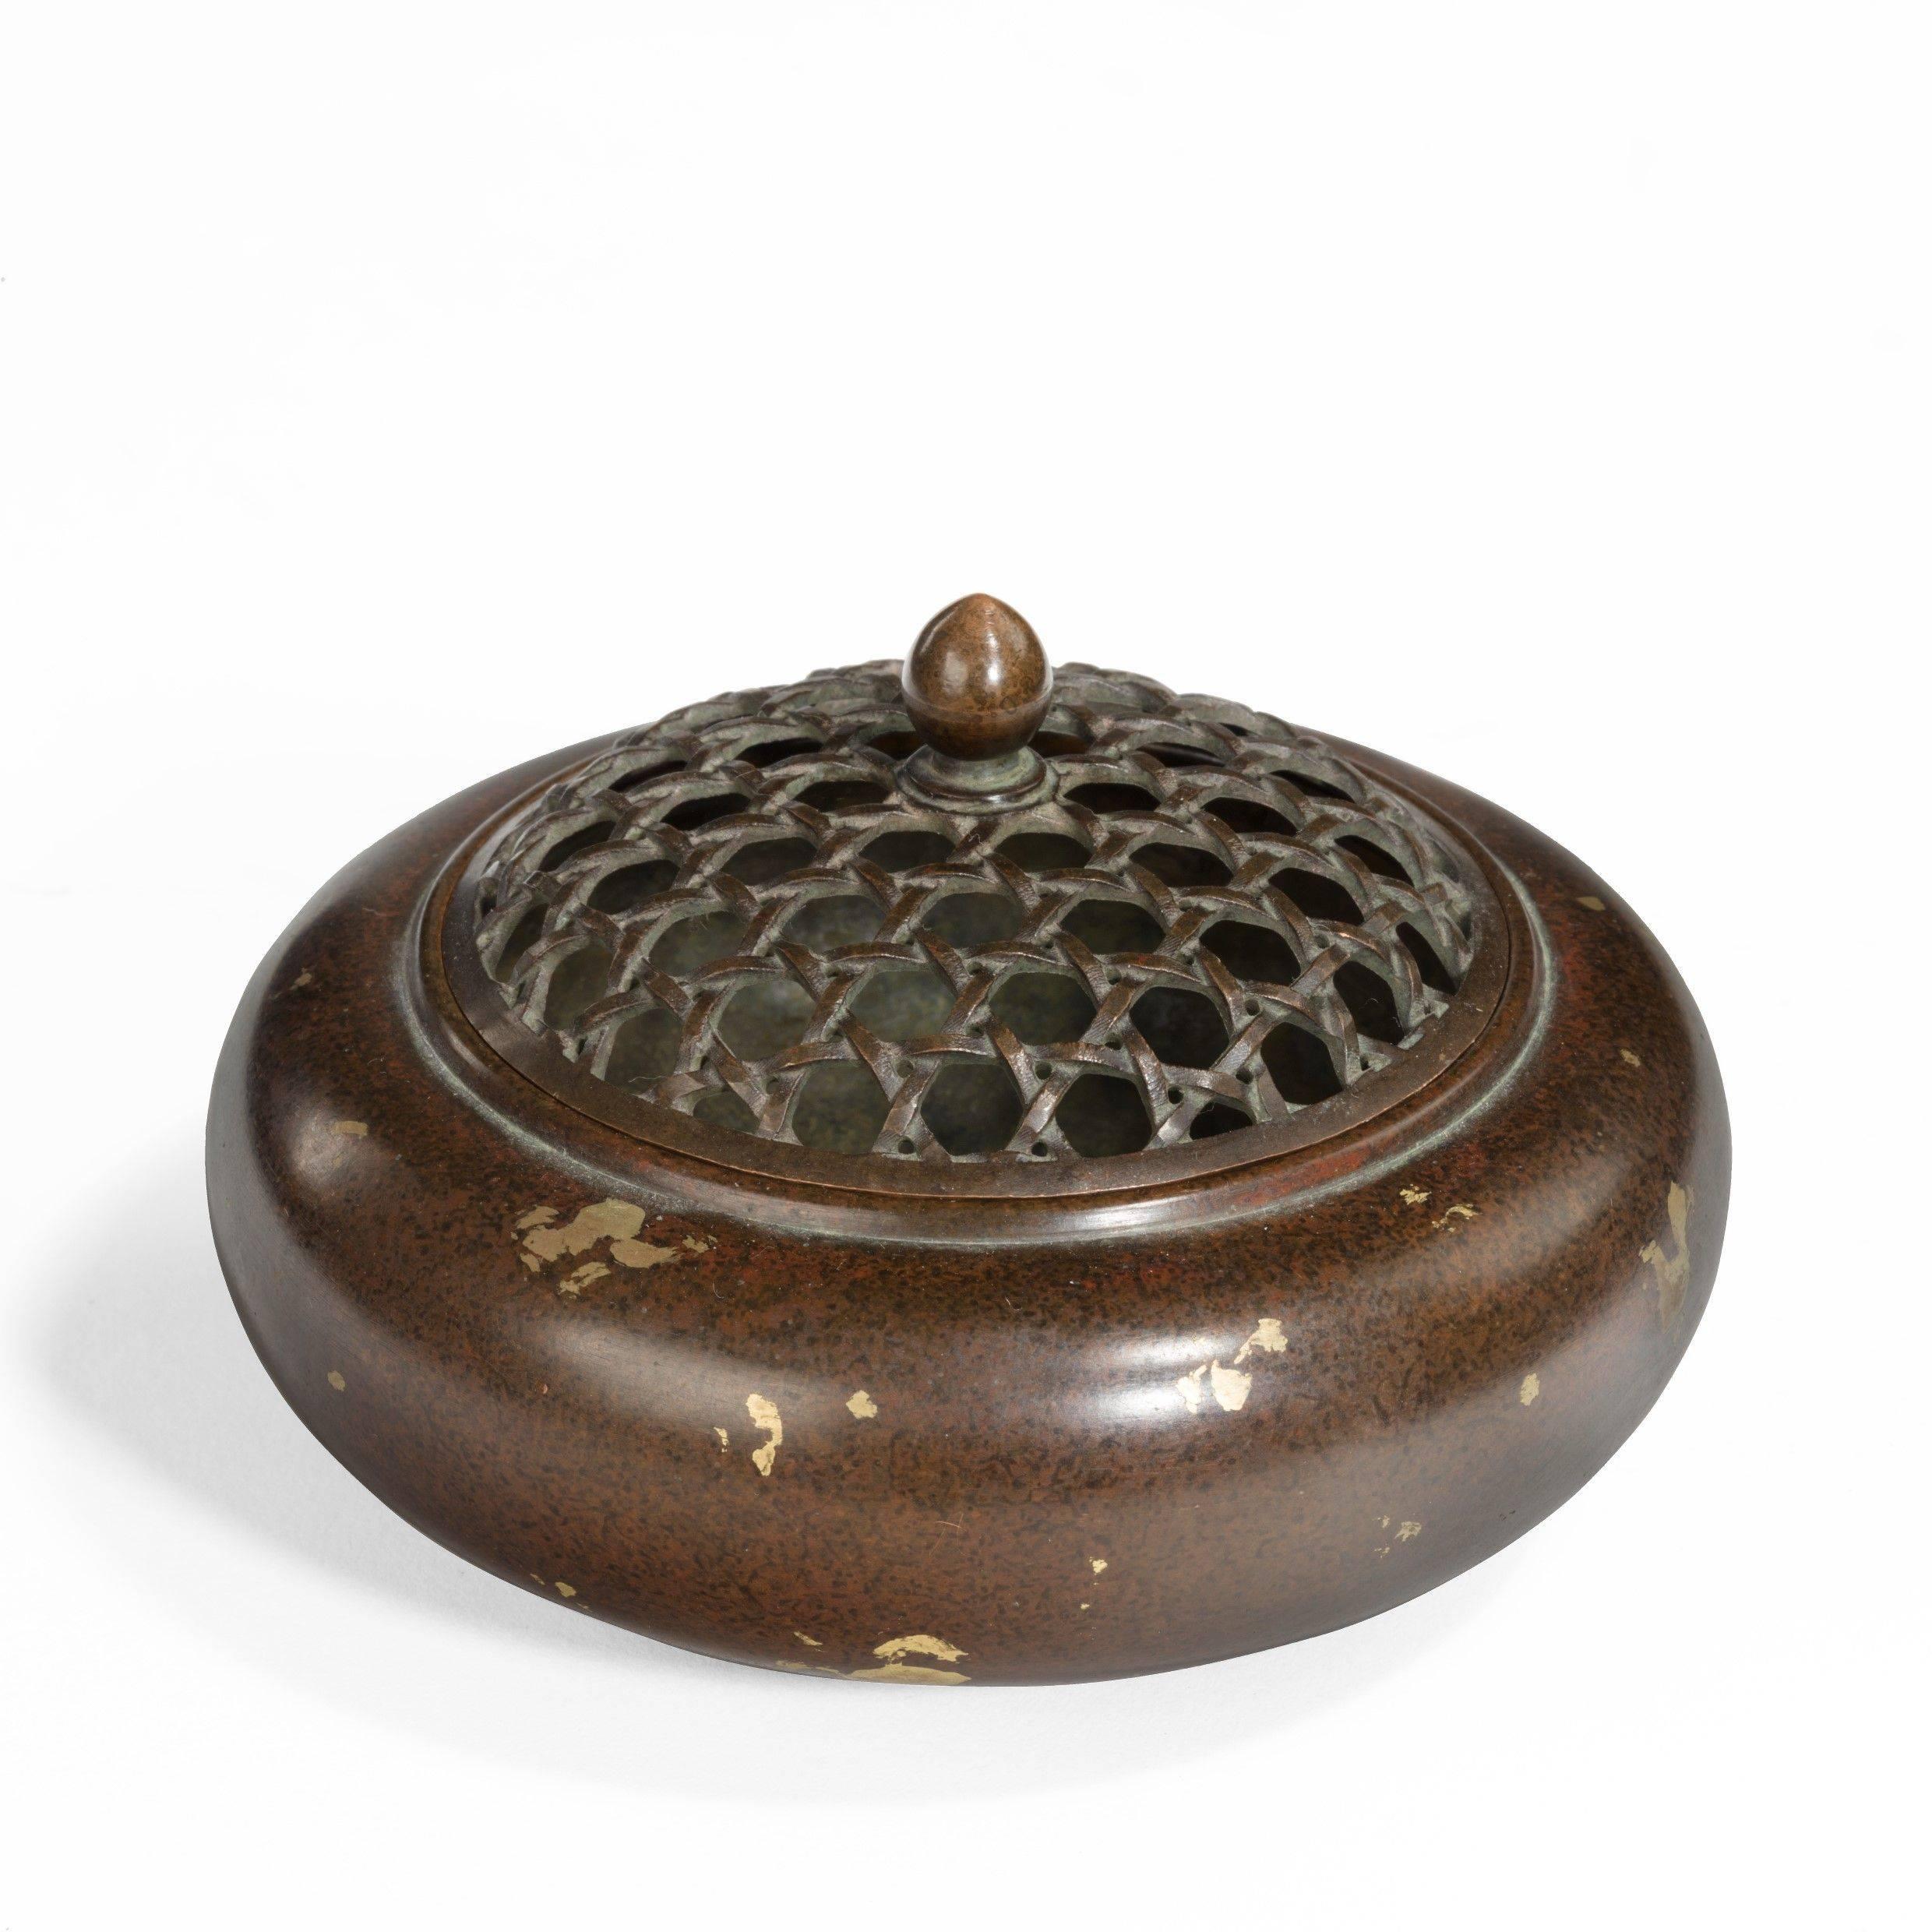 In the Chinese splash-ware style, with sprinkled gold leaf and a reticulated basket-weave cover. Signed in a seal, circa 1900.